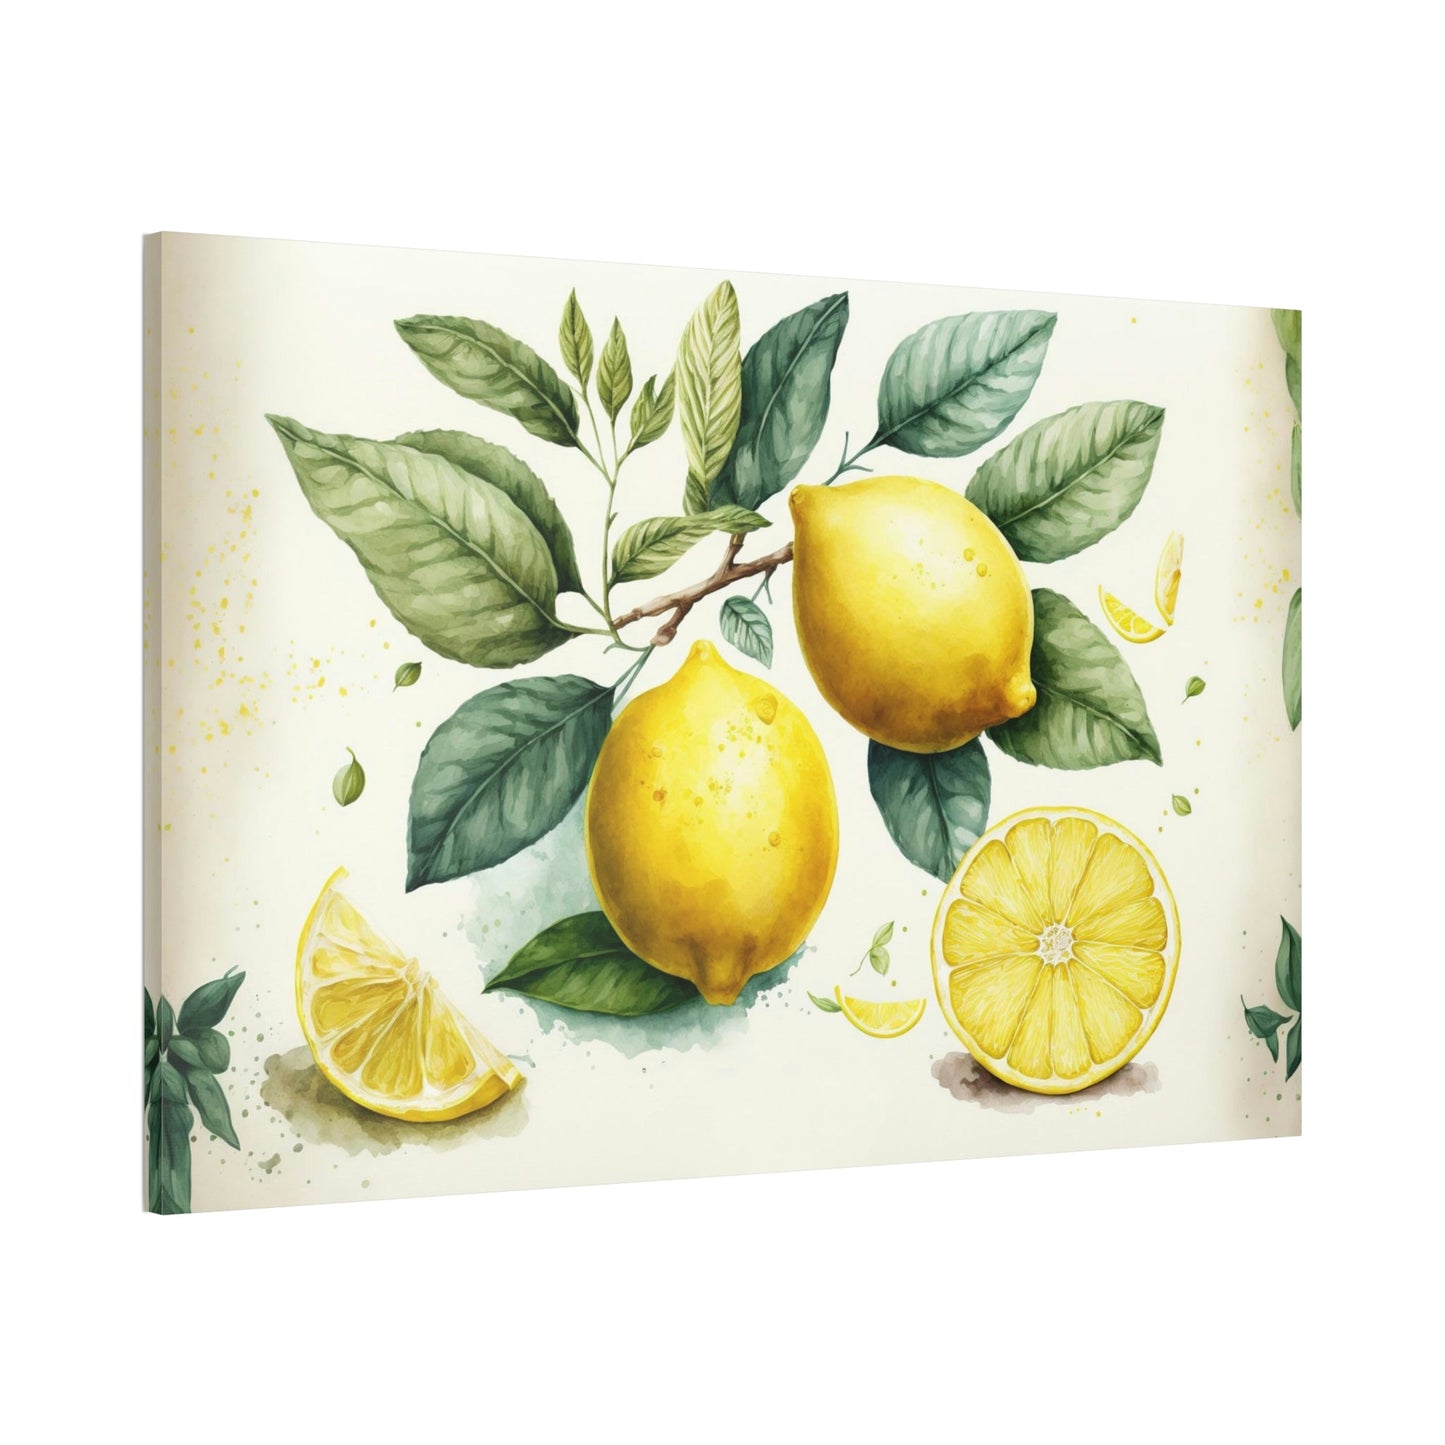 Elegant and Beautiful Canvas Art Prints and Framed Posters Featuring a Yellow Lemon Design